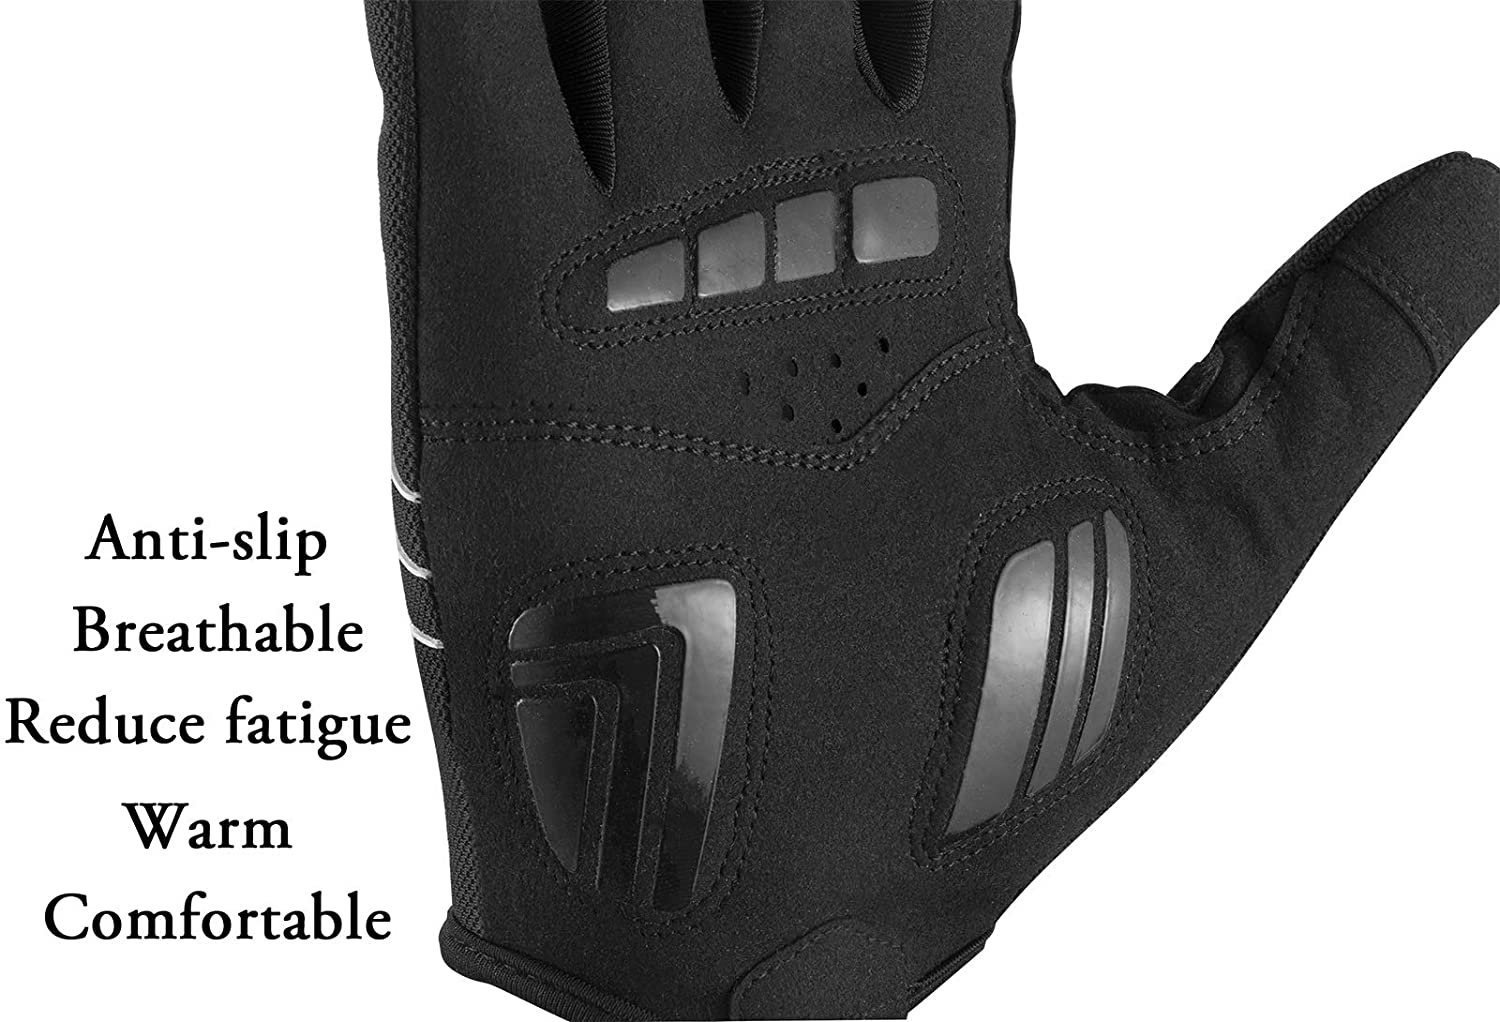 ROCKBROS Cycling Full Finger Gloves Outdoor Sport Gloves Fit for Spring Autumn